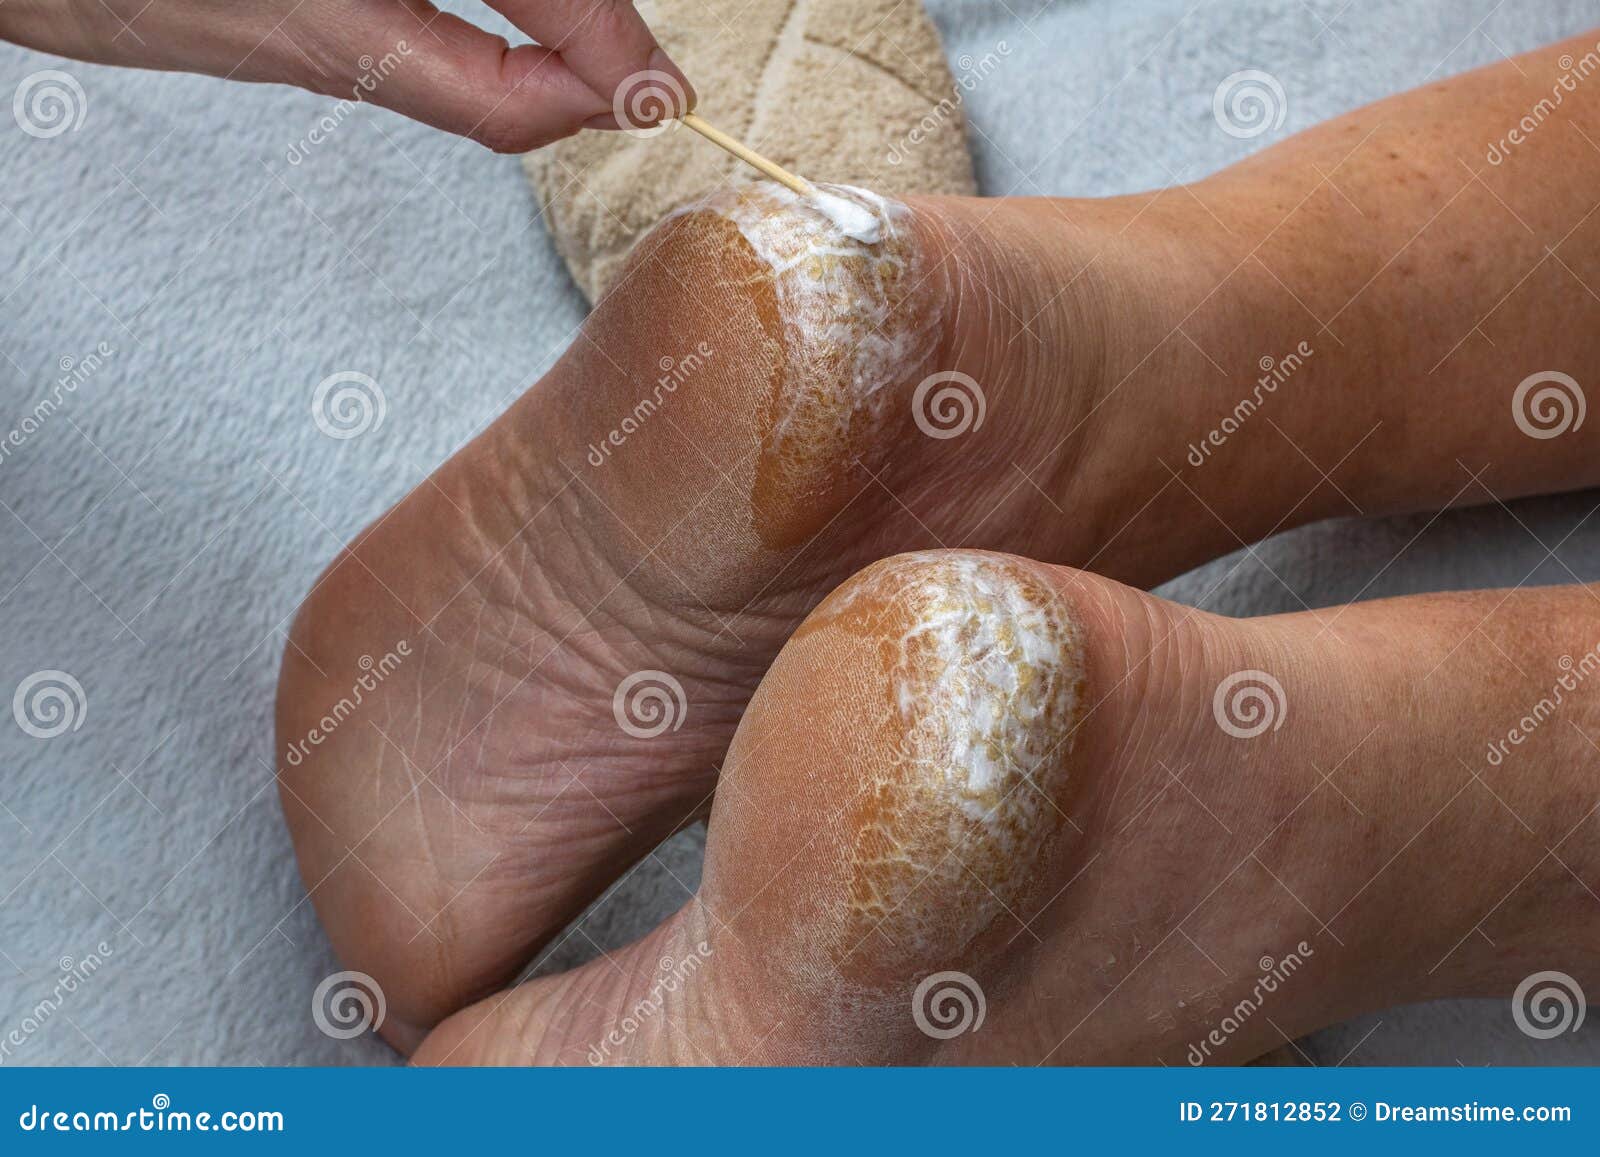 Heel with dry skin and cracks. Medical pedicure. An orthopedic doctor  applies a healing cream to the cracked heels of a sick man. The concept of  treating cracked heels. - Stock Image -